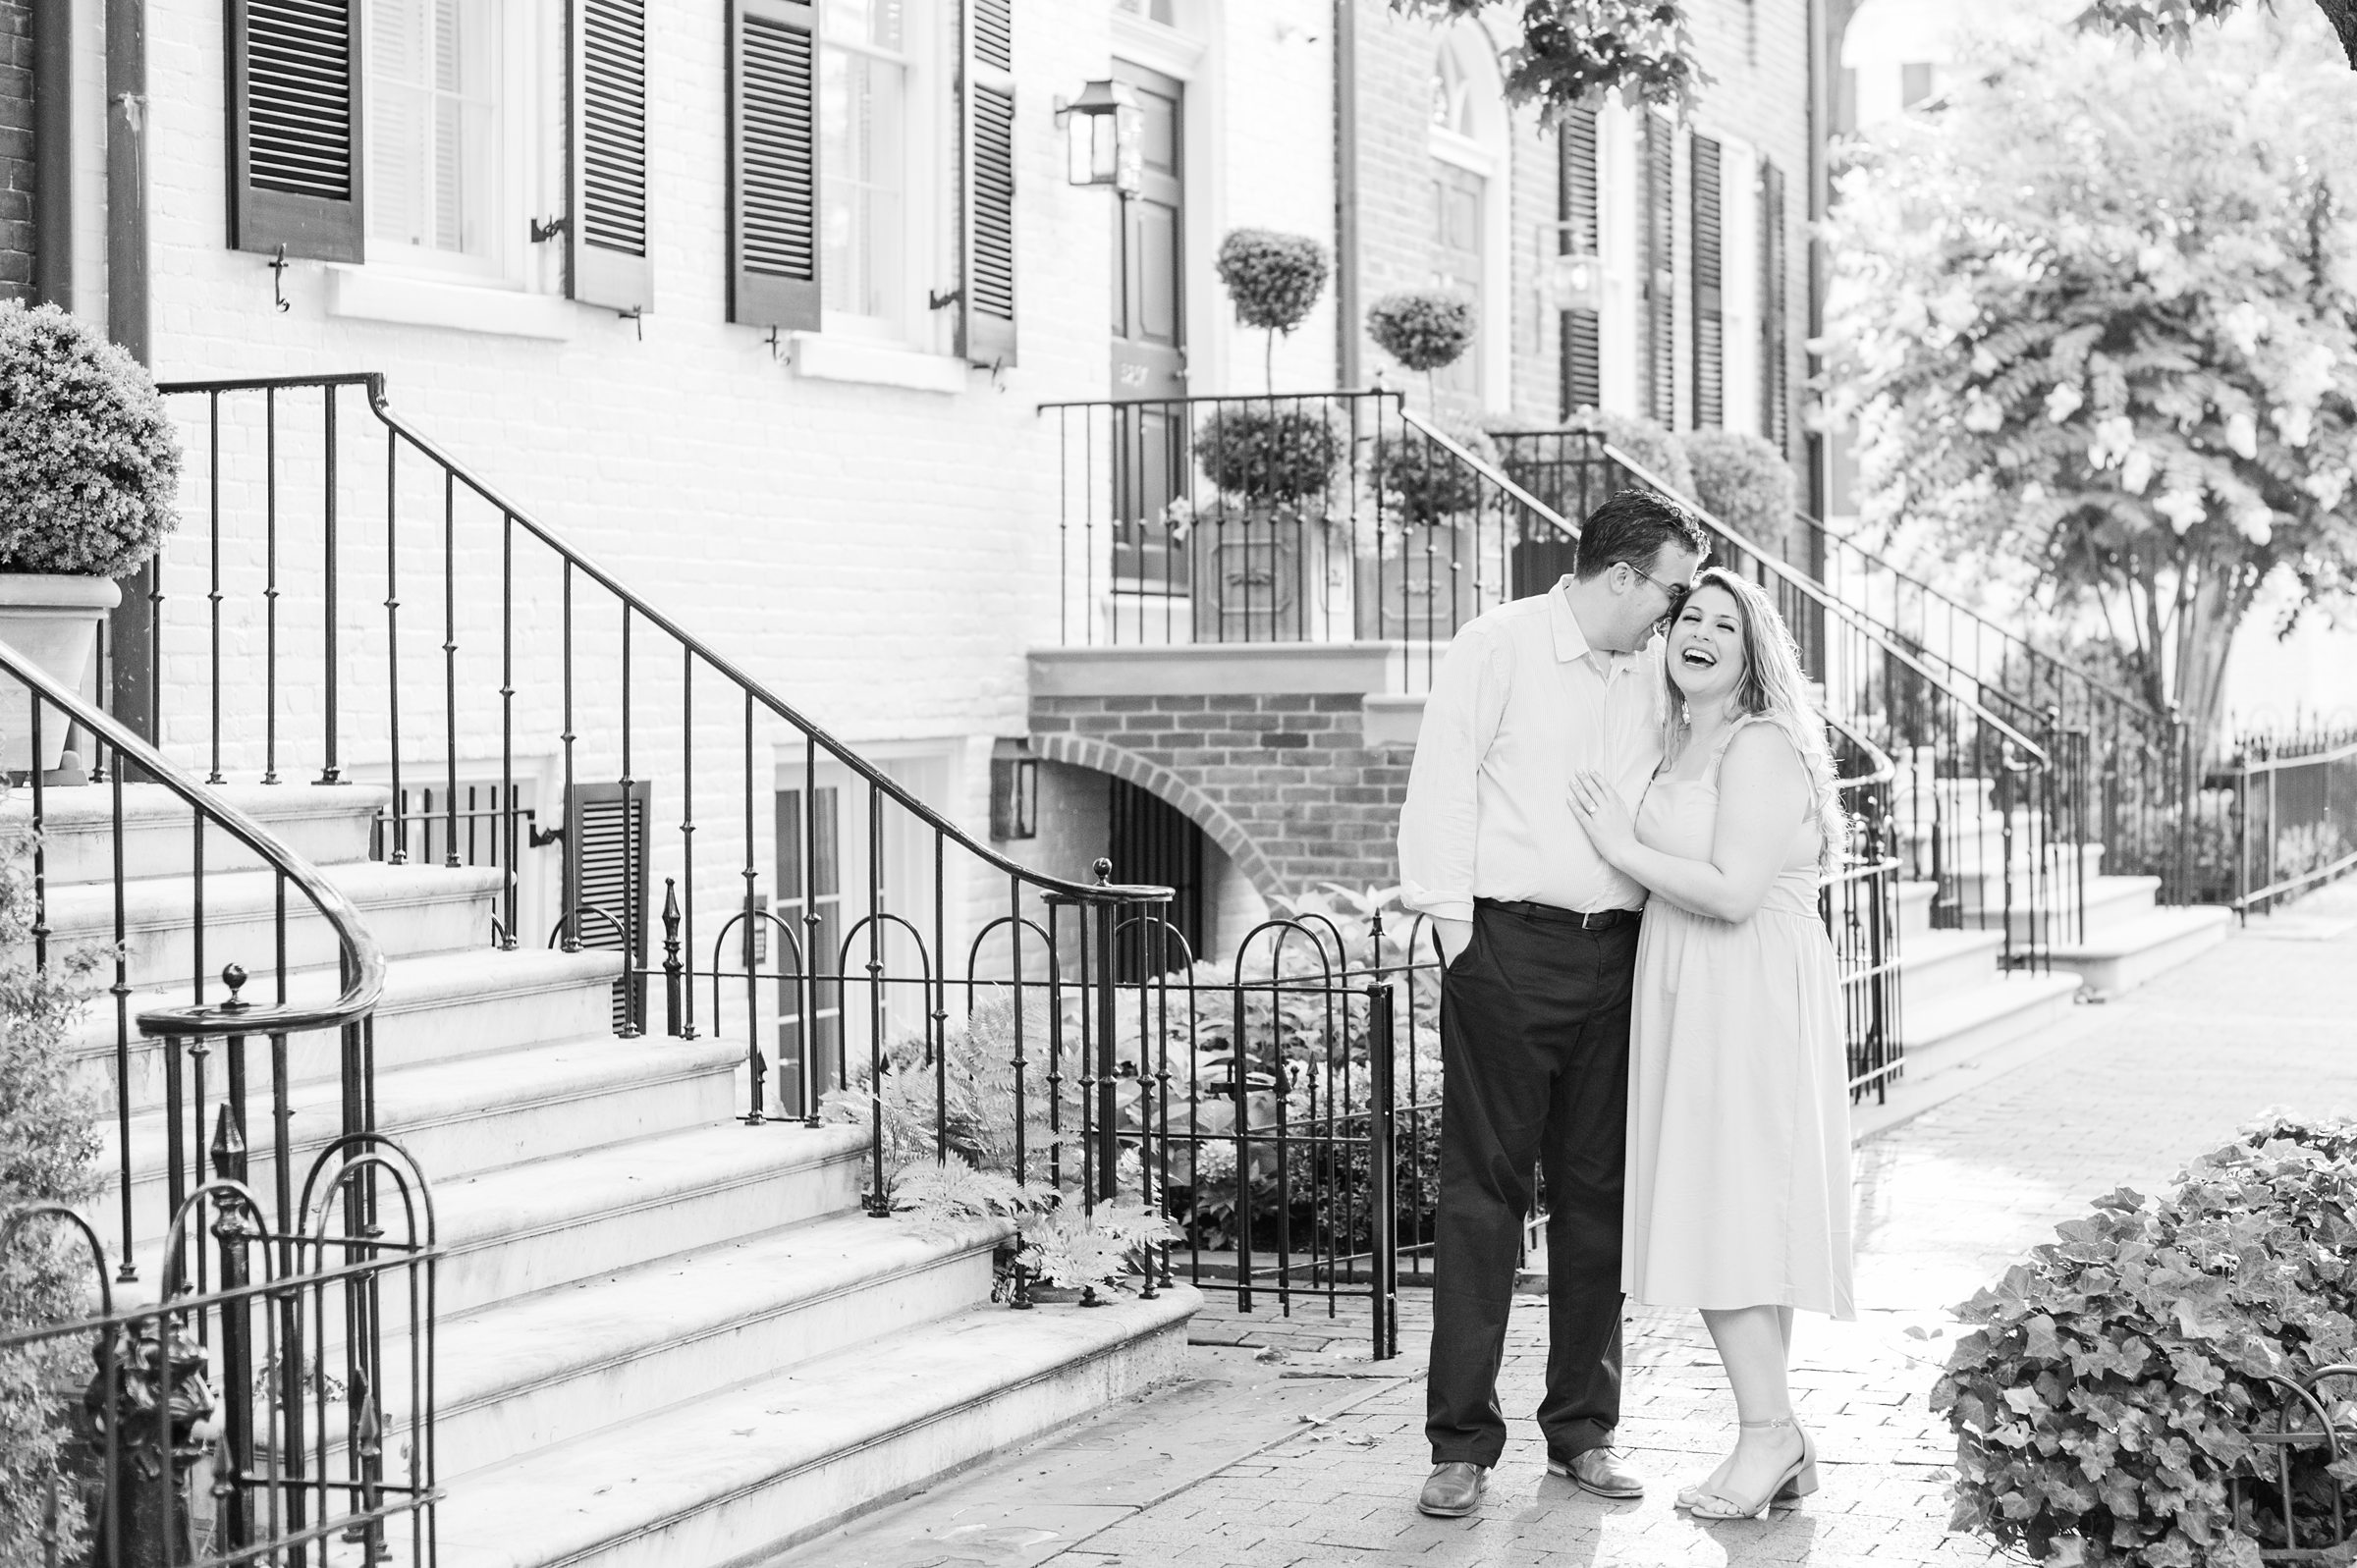 Engaged couple smiles in Georgetown, Washington, DC during engagement session photographed by Baltimore wedding photographer, Cait Kramer Photography